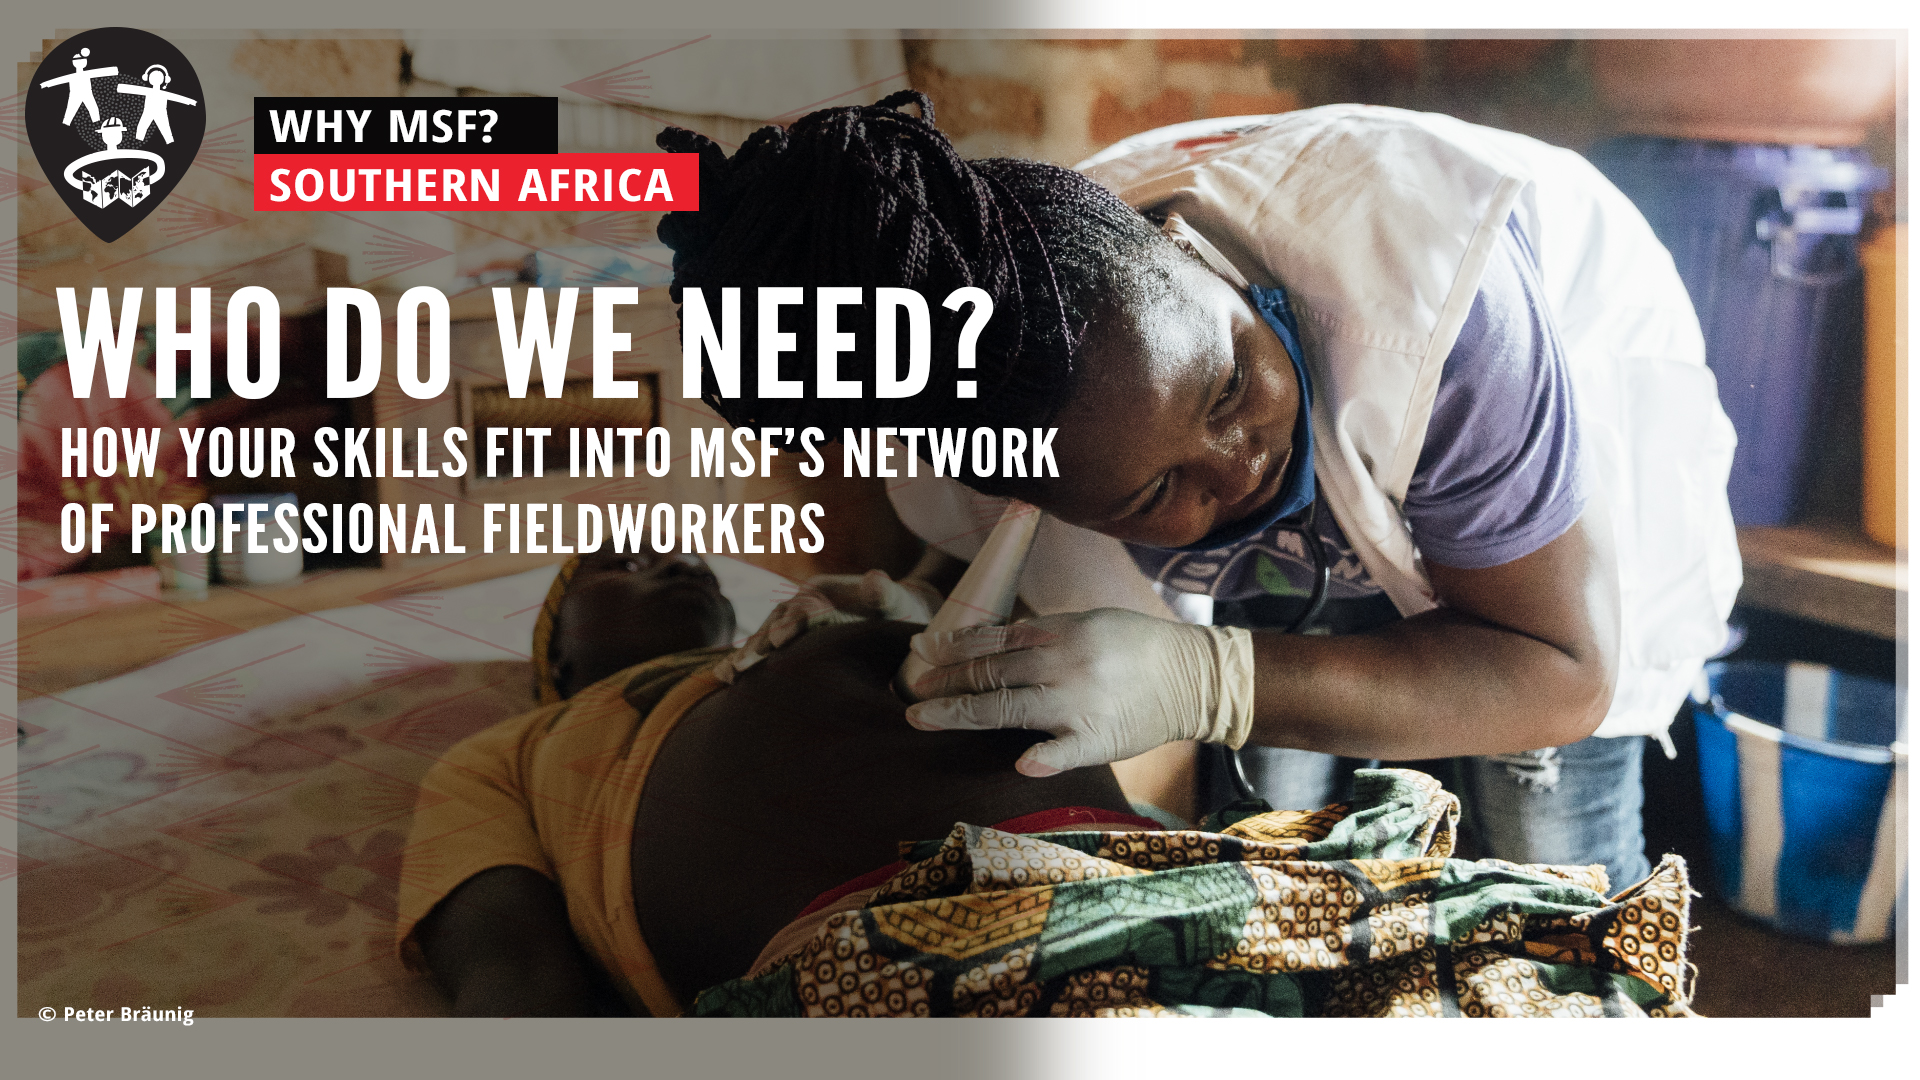 watch this video to find out how you can become an MSF fieldworker